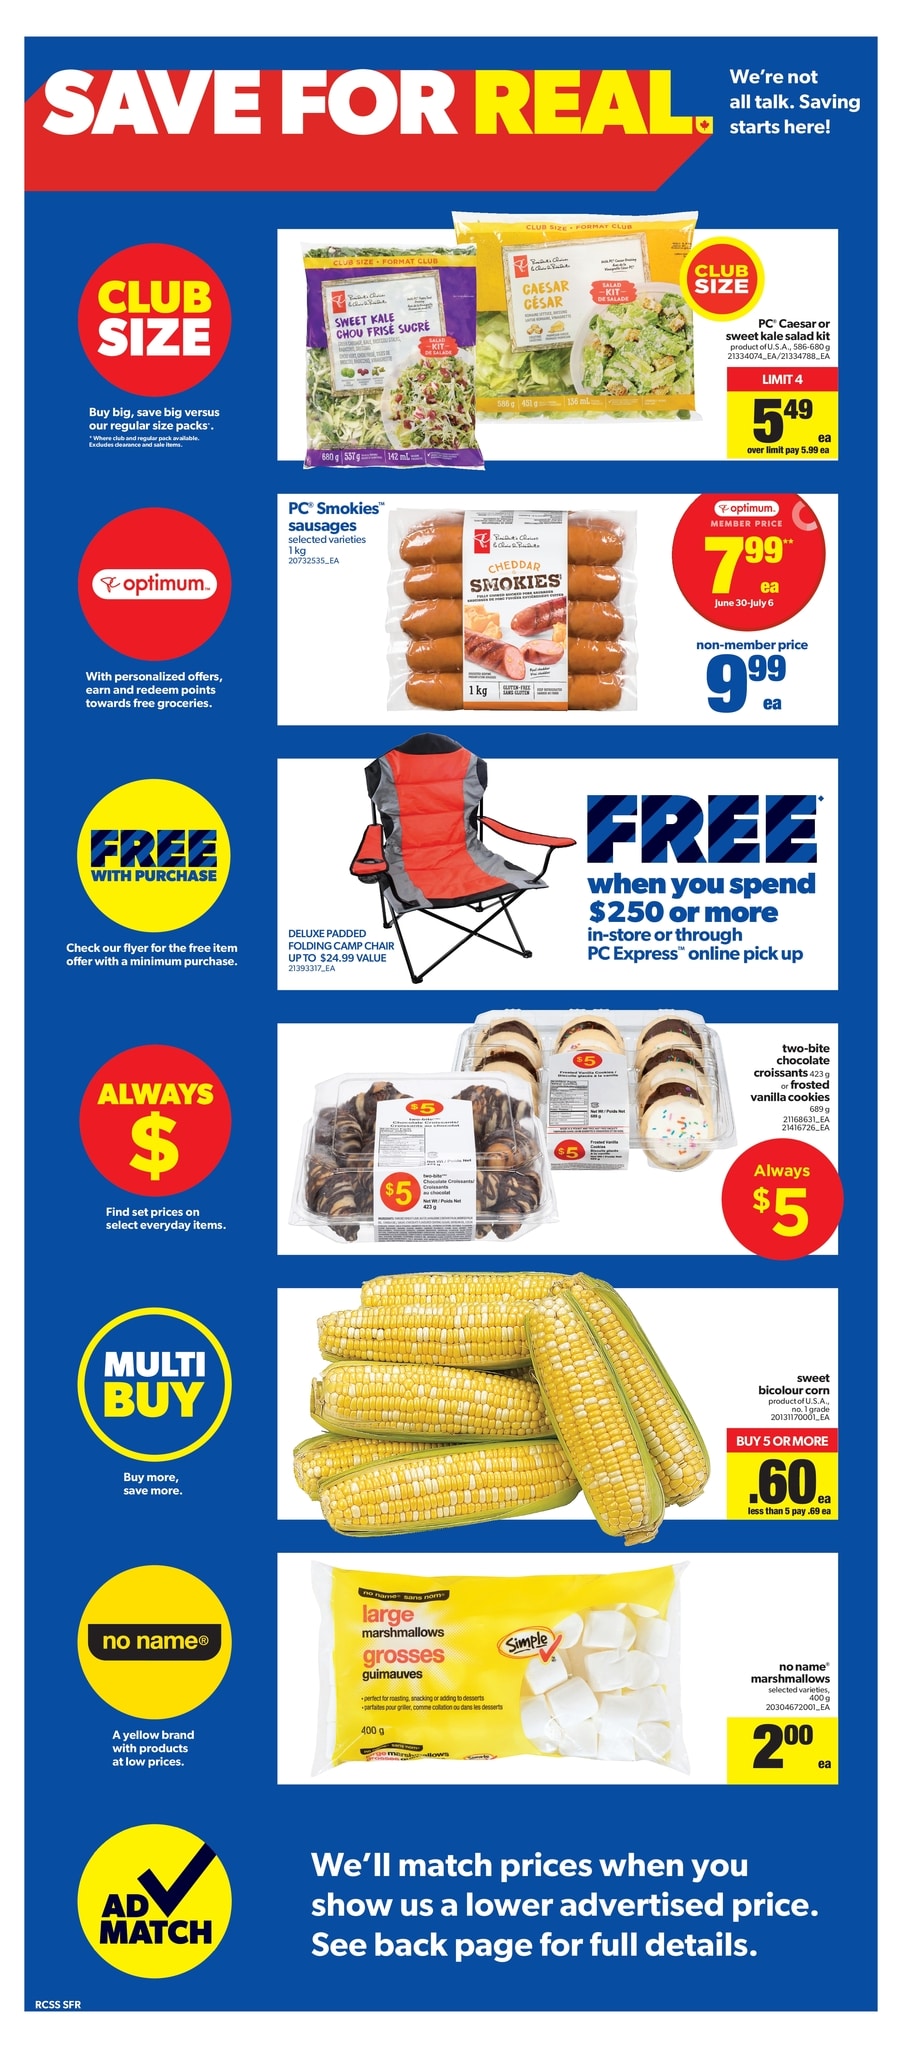 Real Canadian Superstore Ontario - Weekly Flyer Specials - Page 2